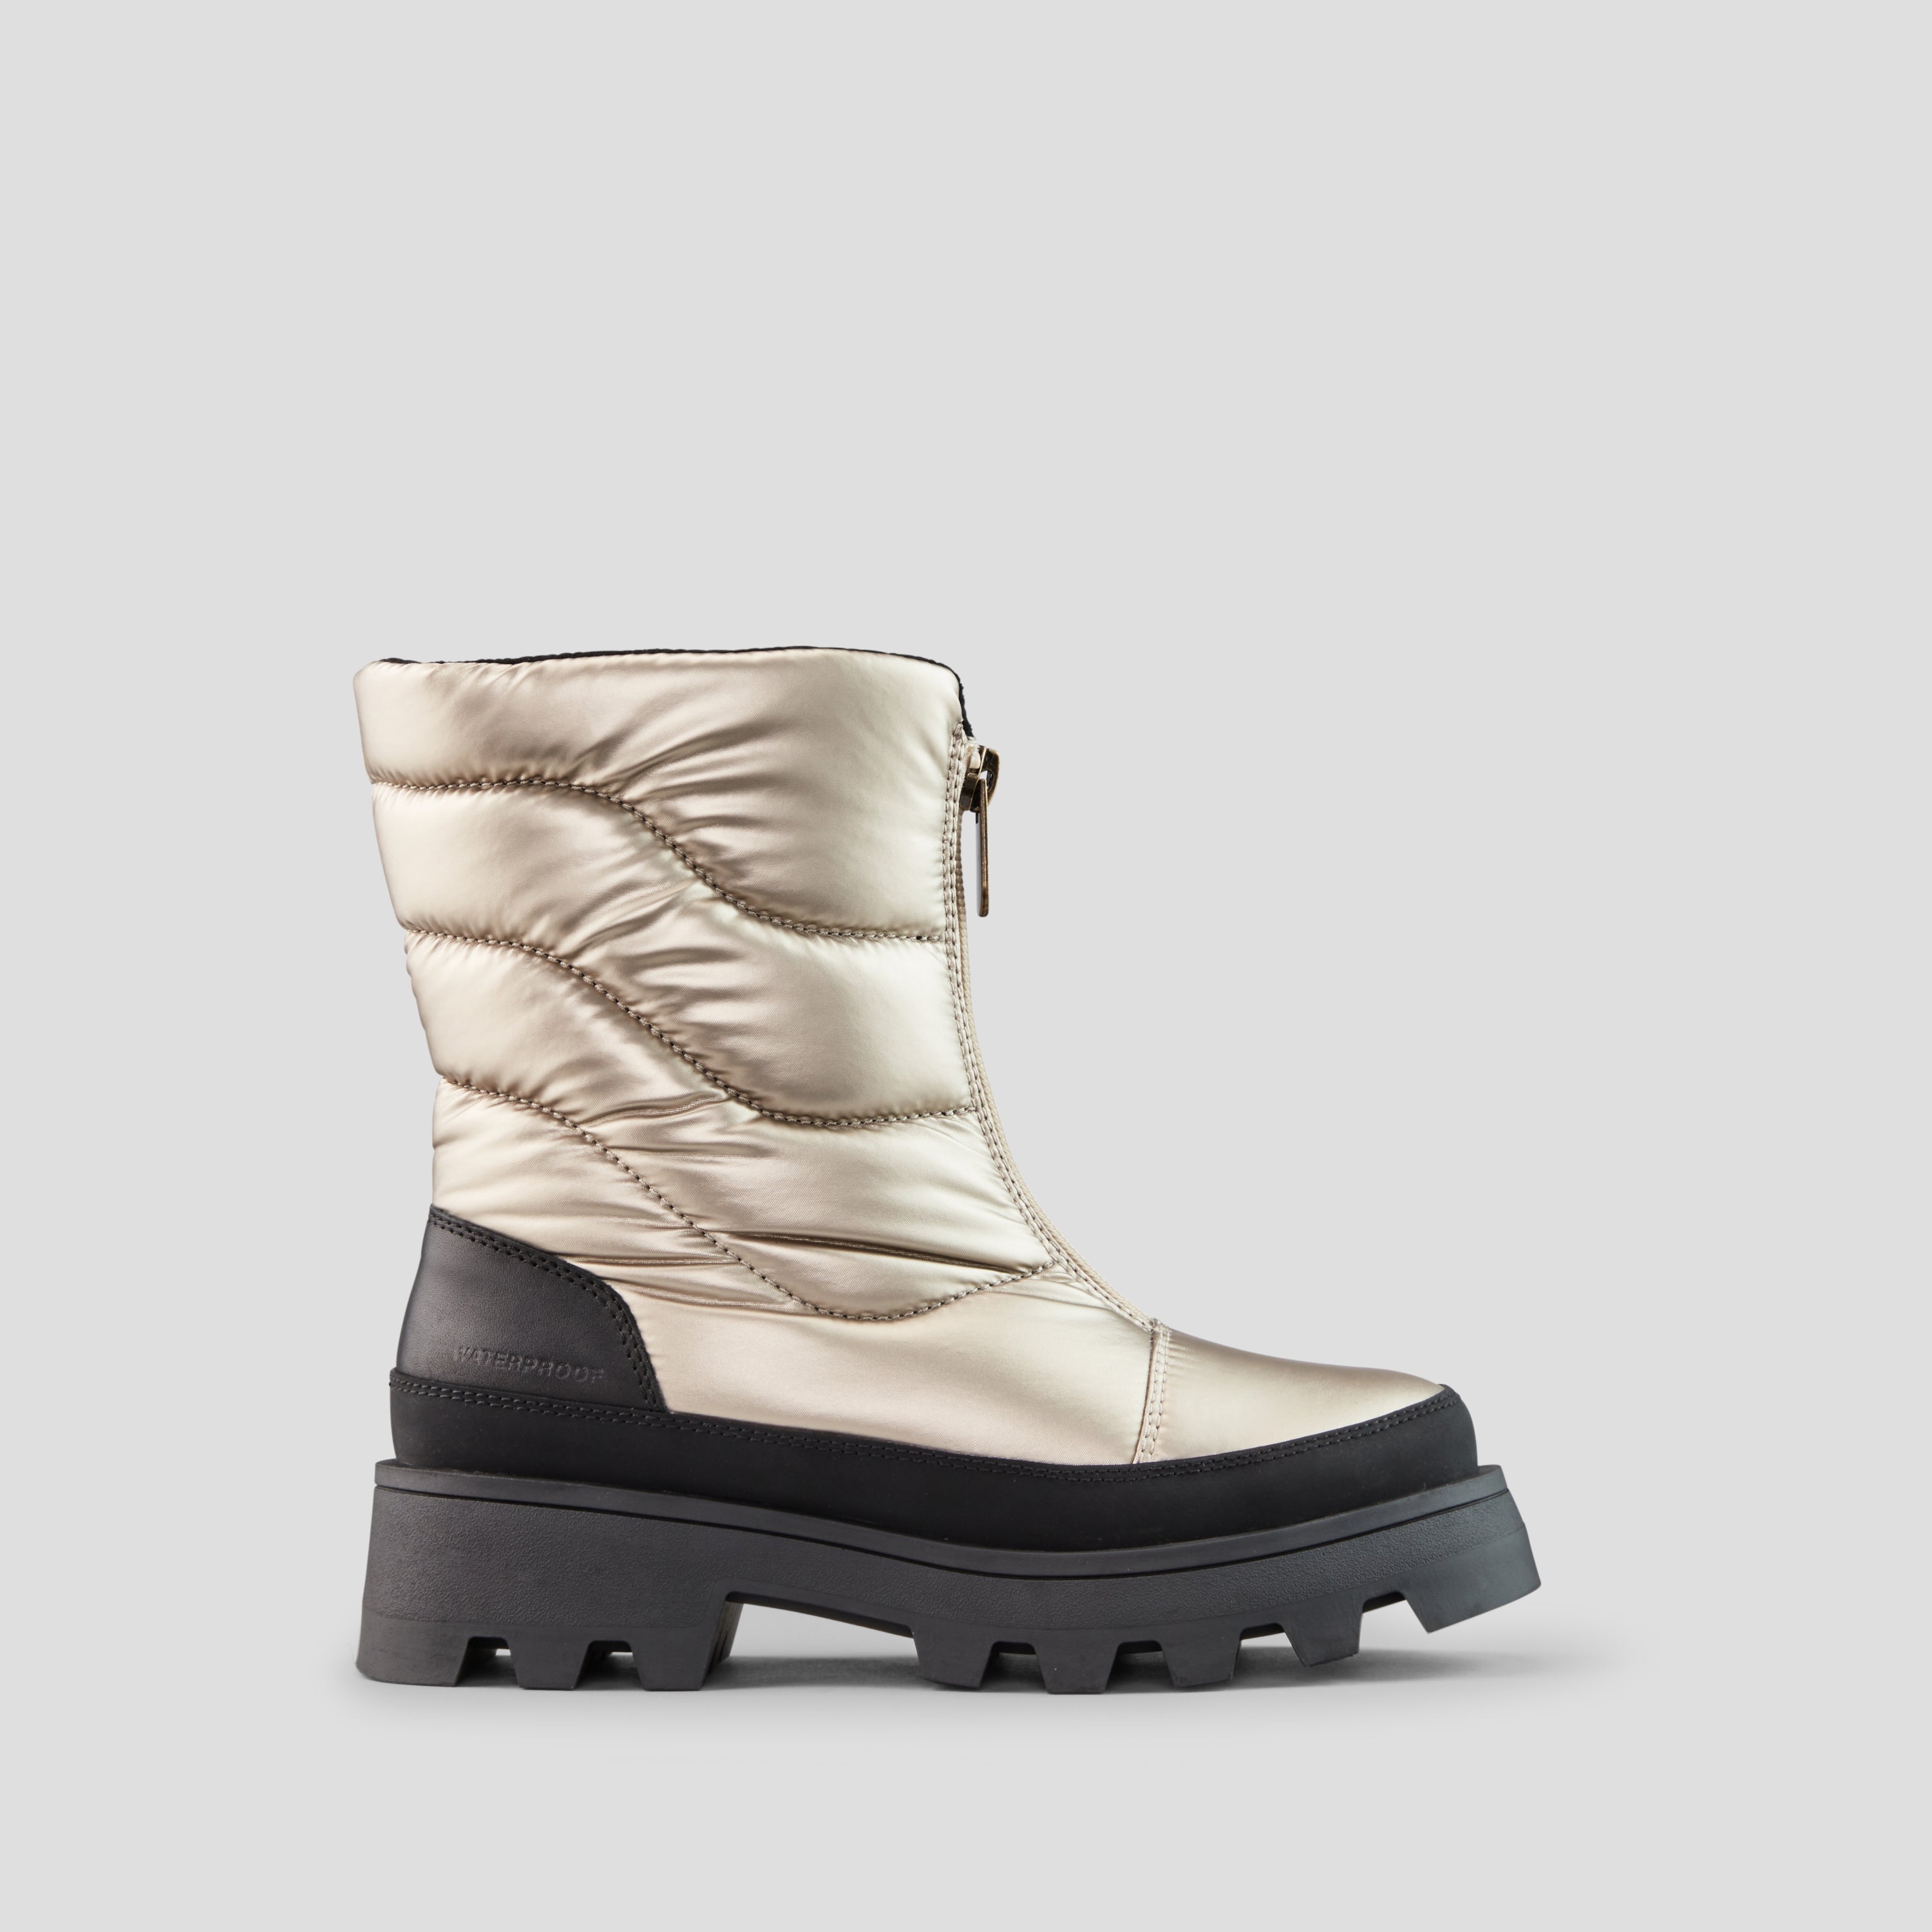 Women's Boots and Shoes | Cougar Shoes Canada